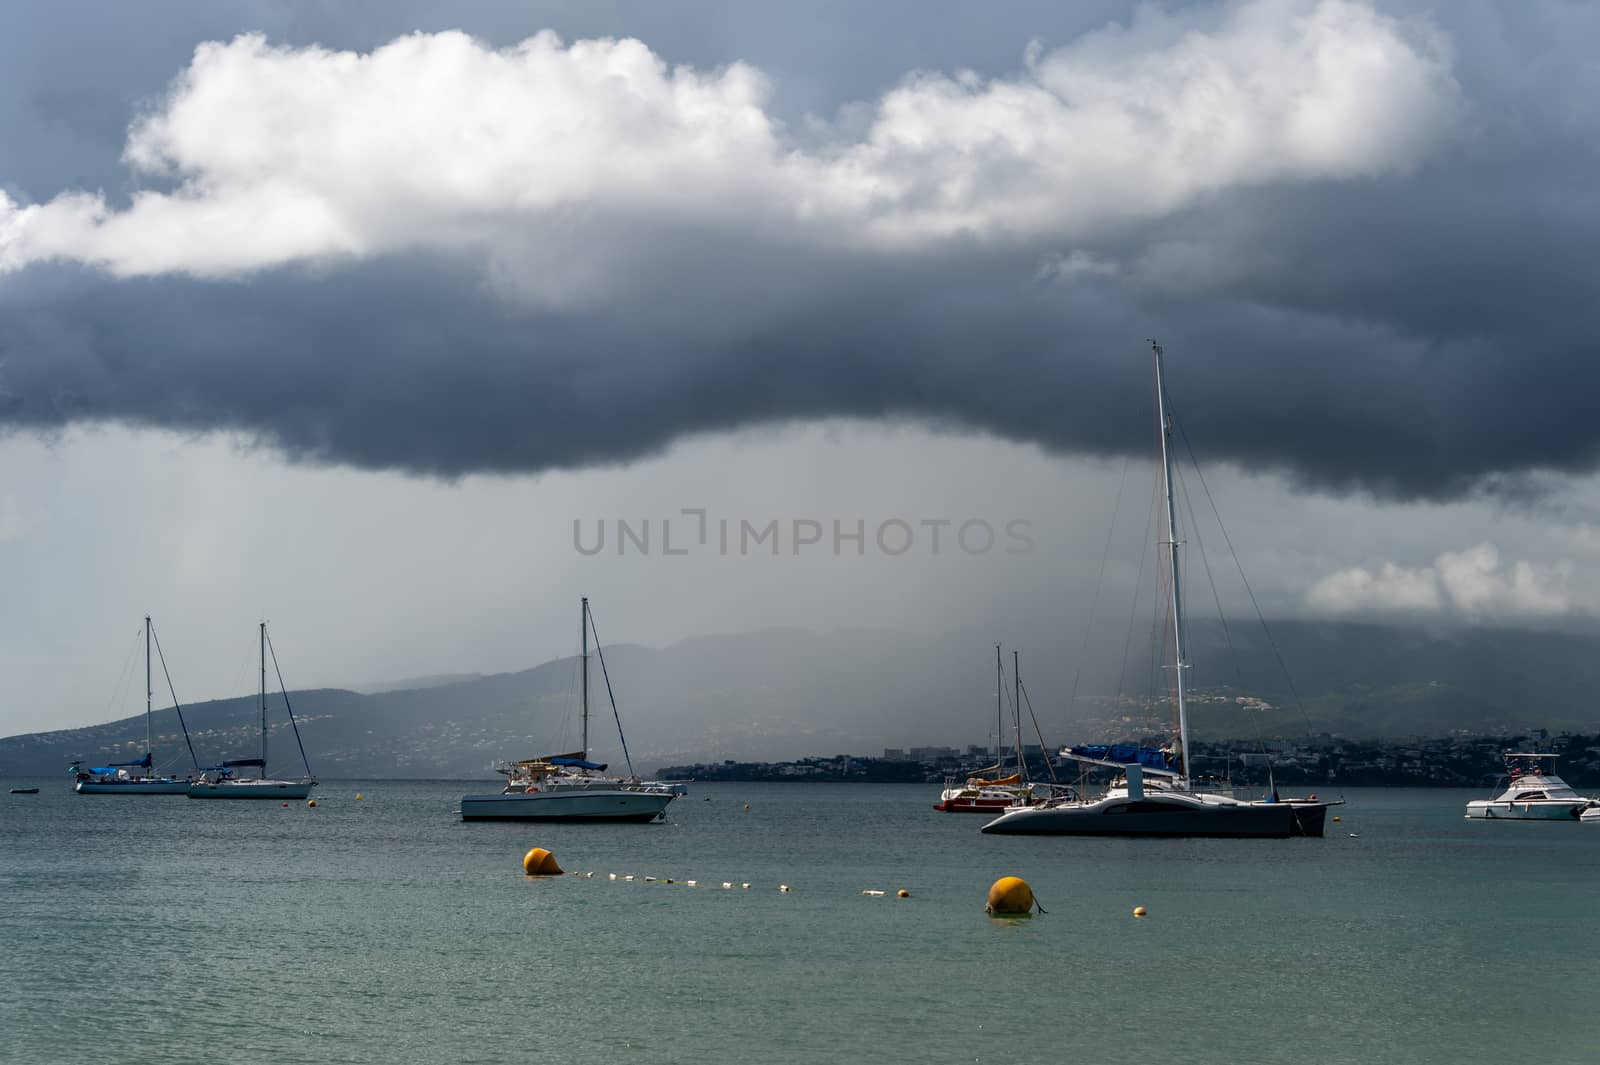 Heavy rain over Fort-De-France and Montagne Pellee Volcano in Martinique, France (2019)